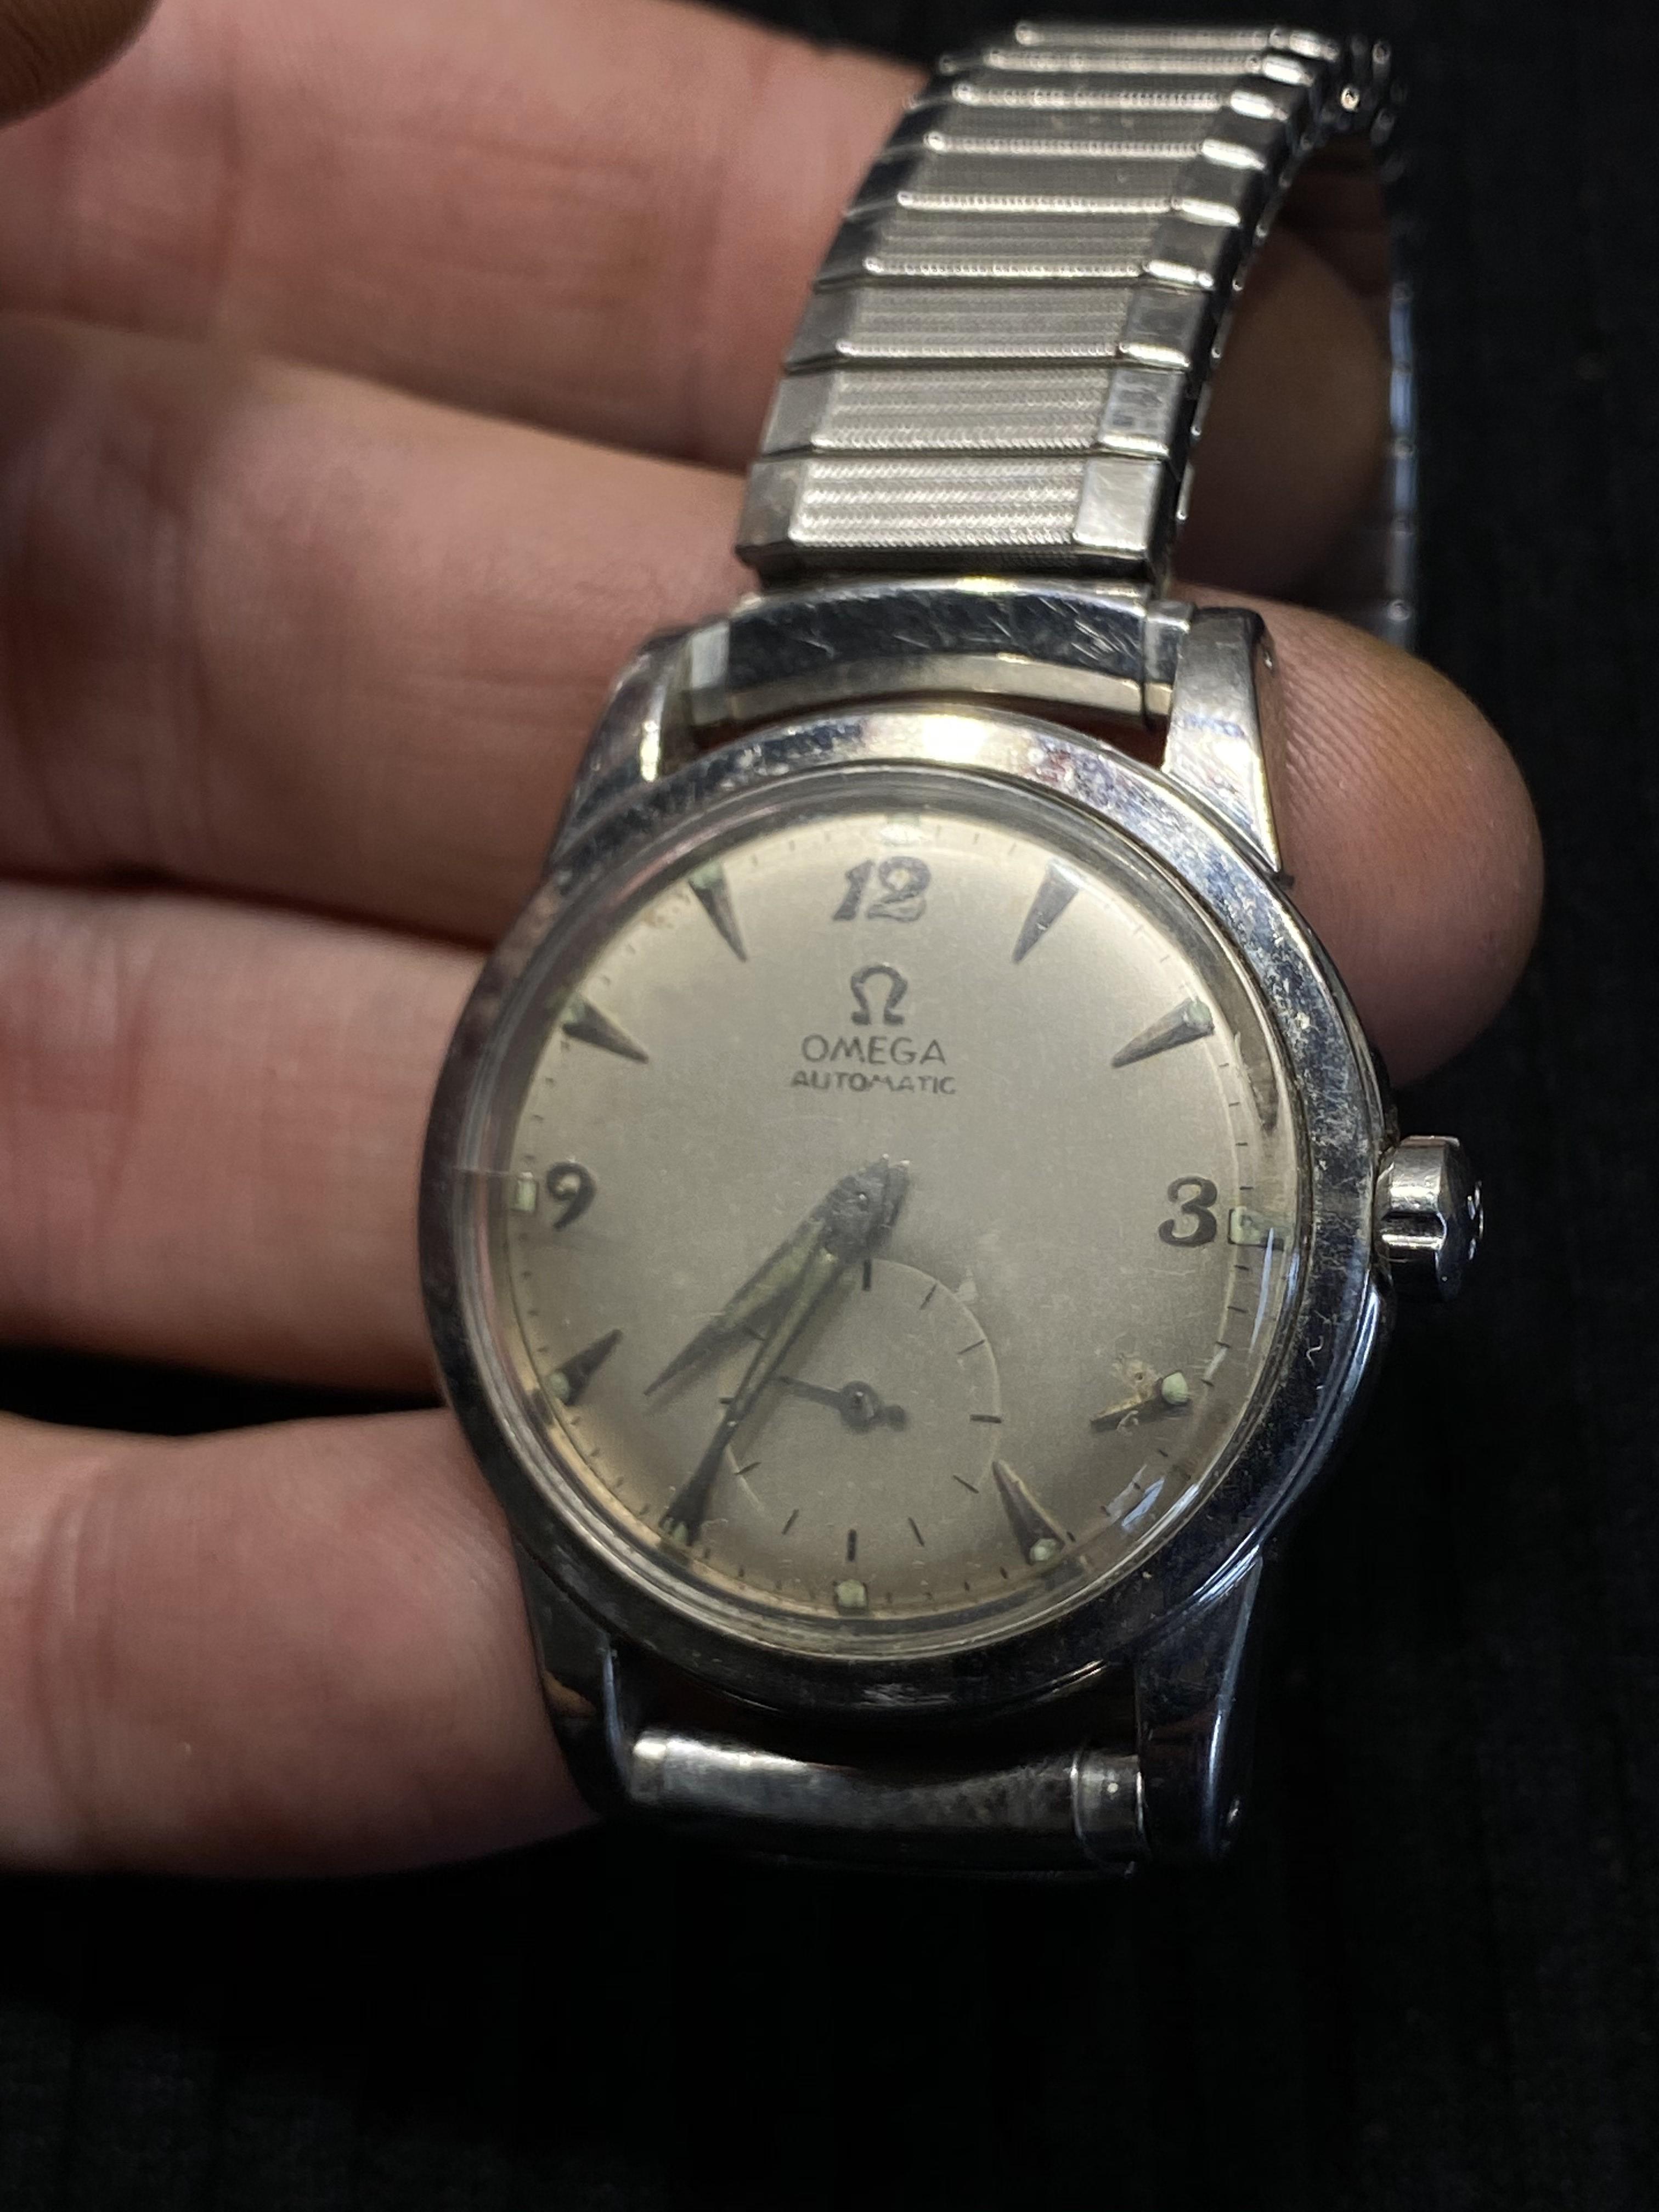 Vintage Omega Automatic Watch in Stainless Steel Case